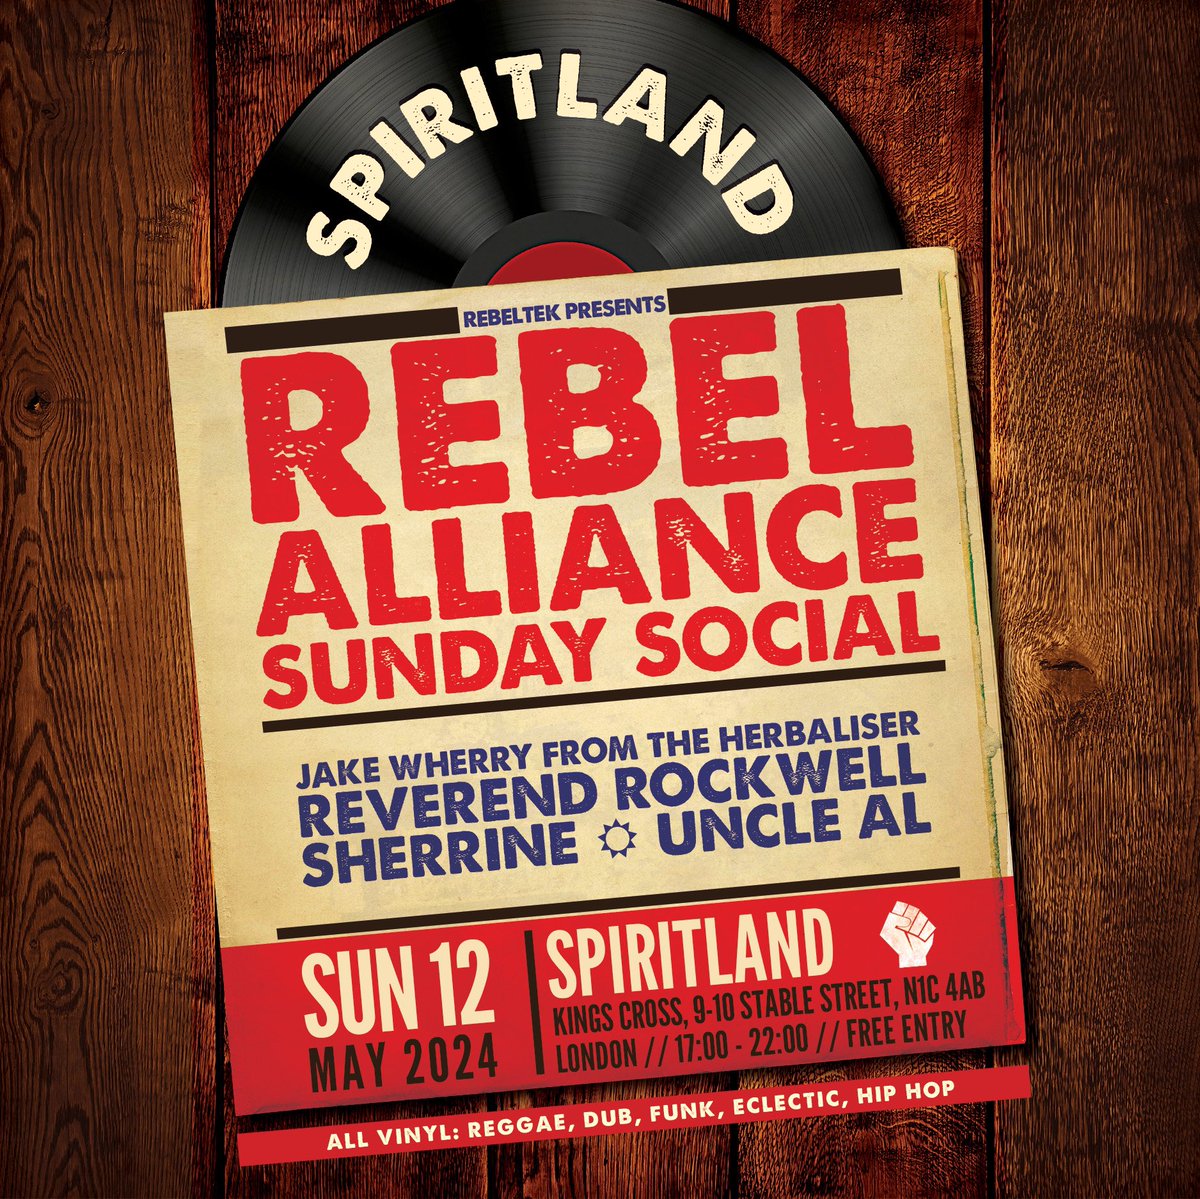 Join us this weekend for the Rebel Alliance Sunday Social at Spiritland in Kings Cross! As London basks in sunshine all week, close out your weekend with some eclectic music played on vinyl through a bespoke soundsystem, alongside drinks, snacks, and great company. Free entry!